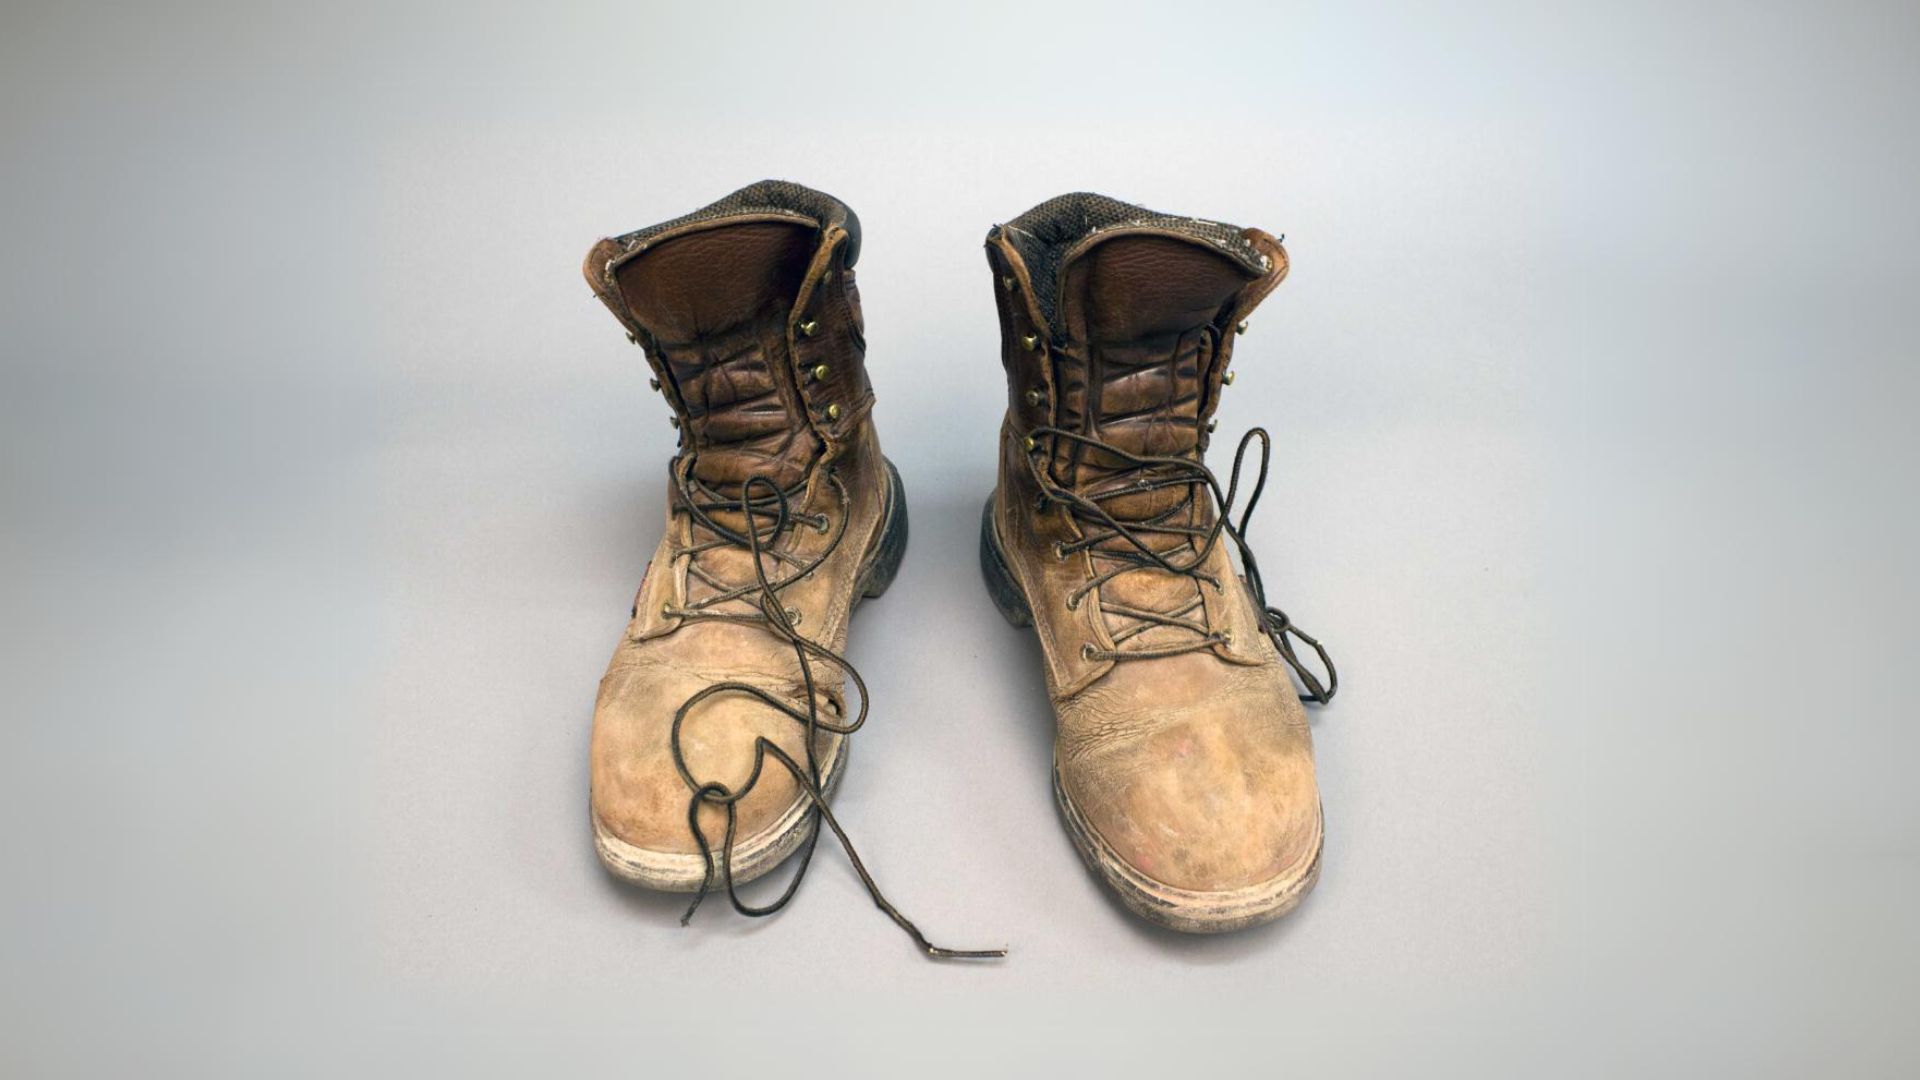 A pair of work boots with visible damage.